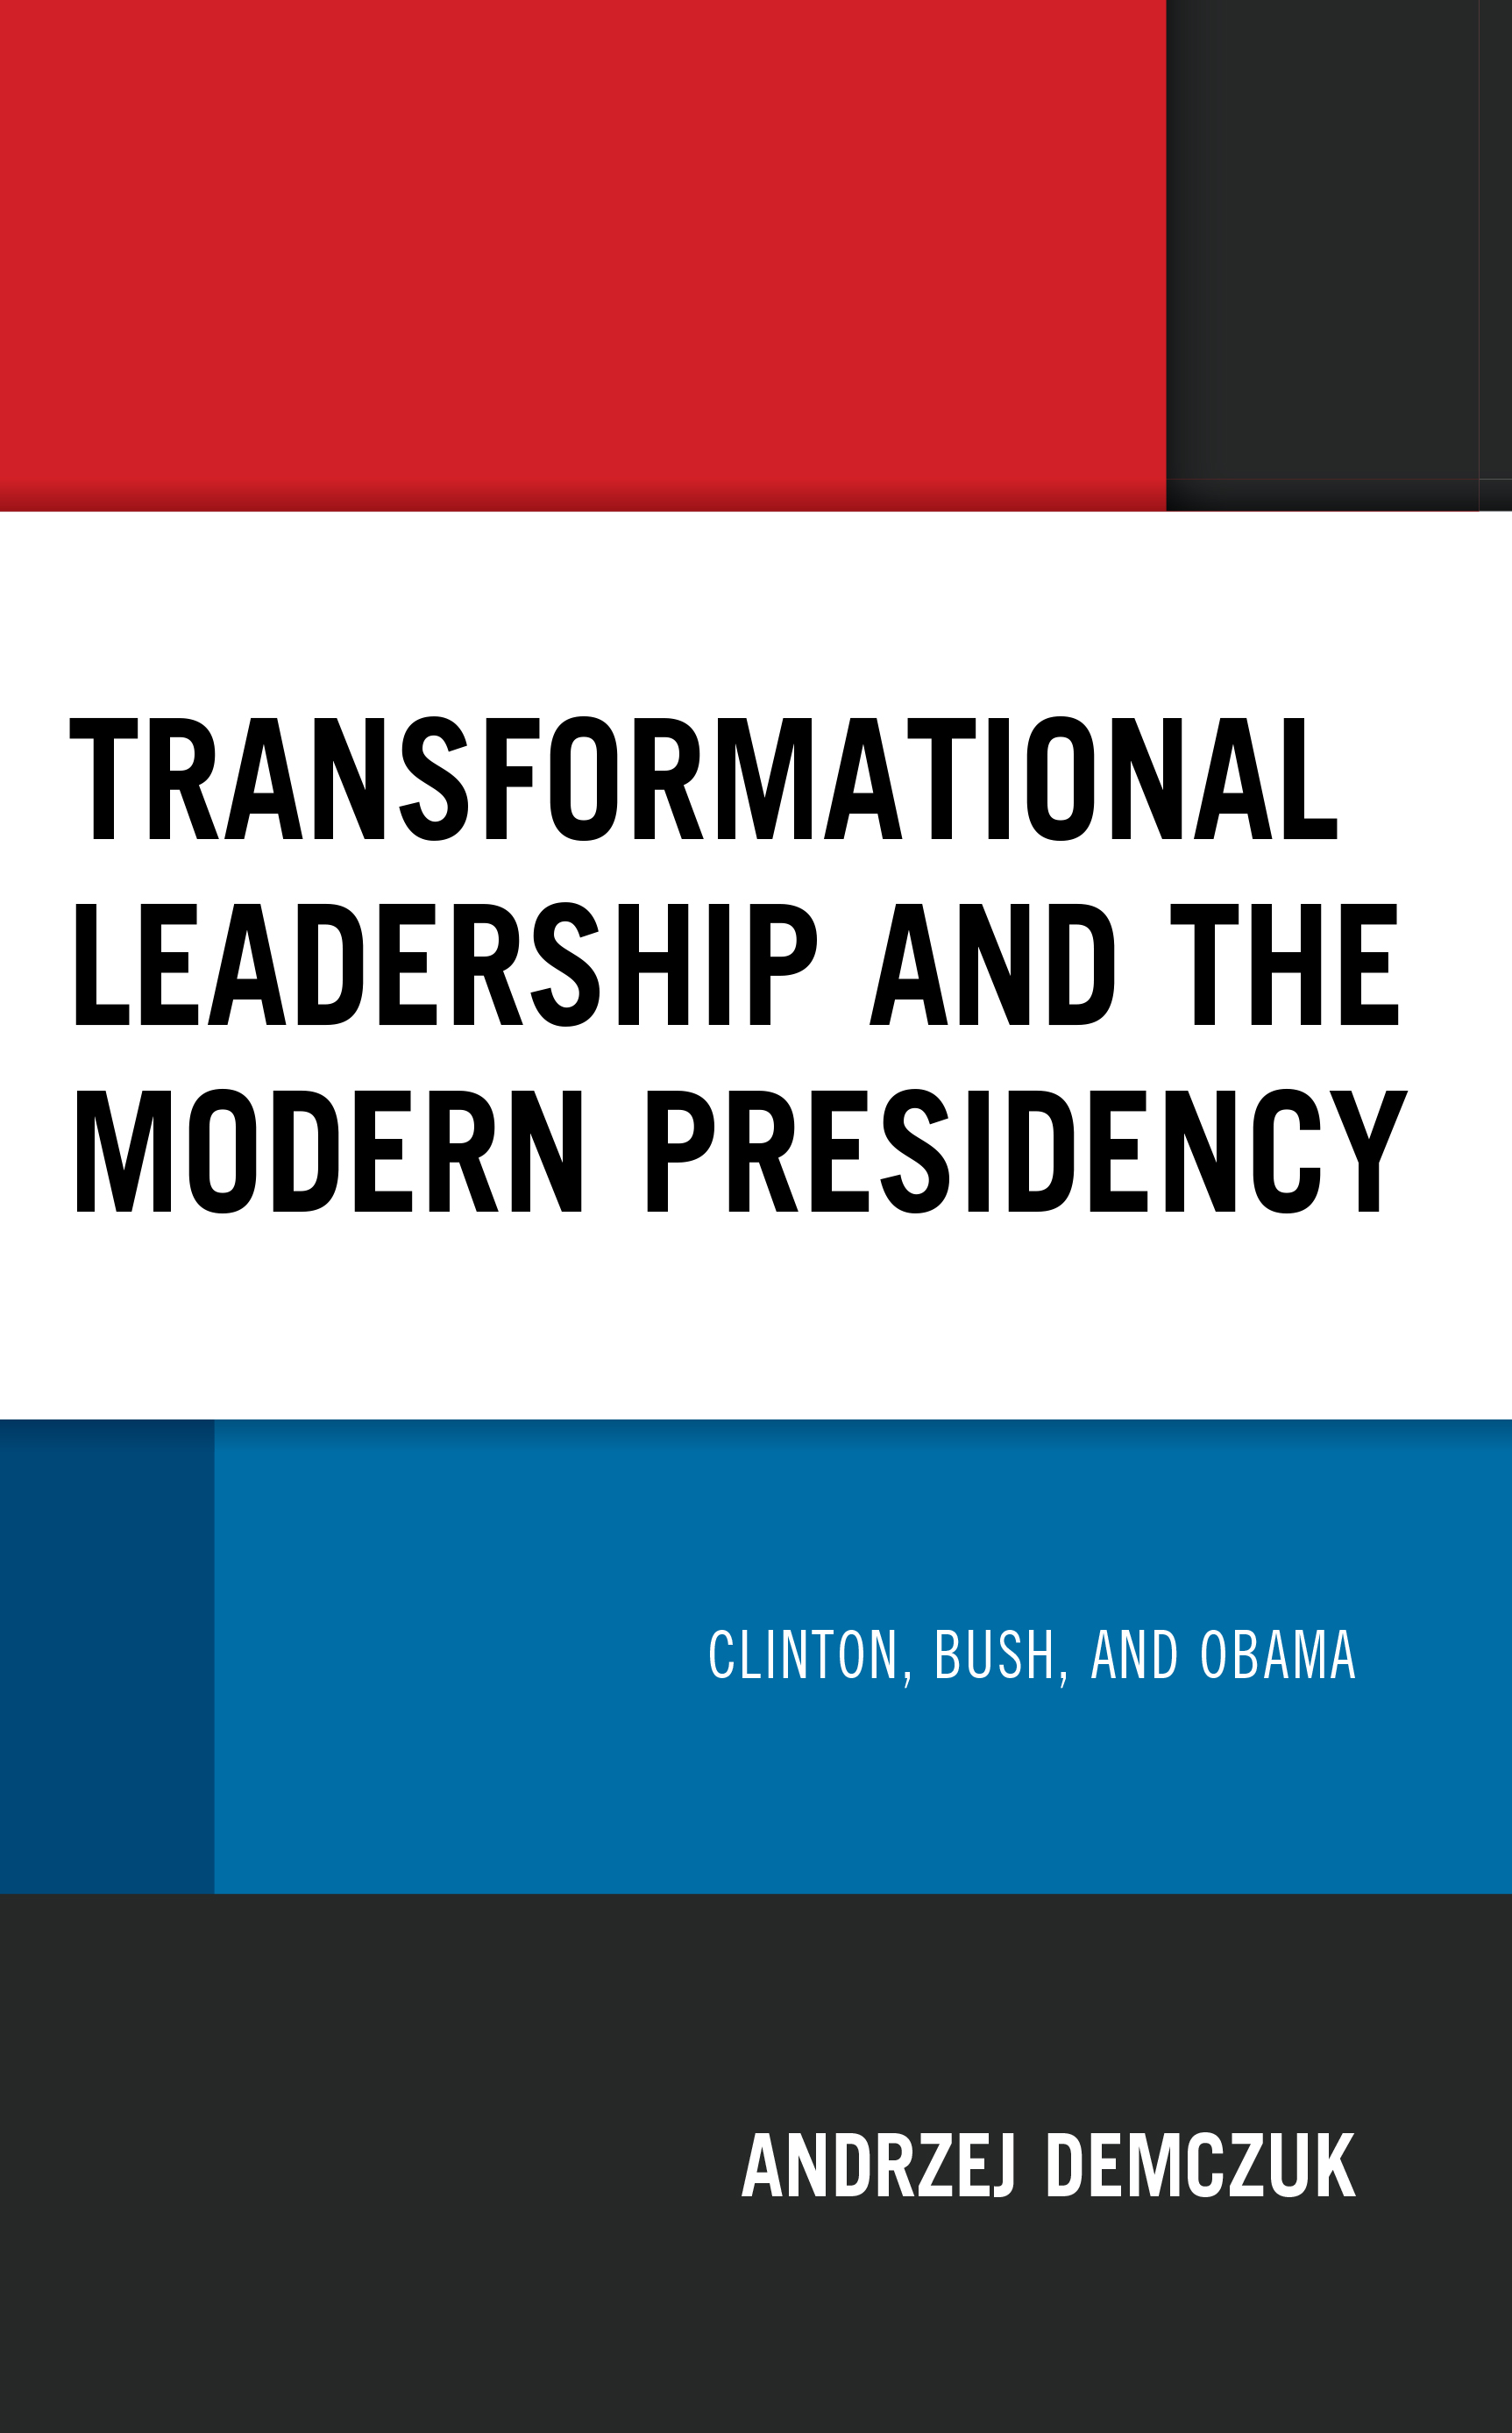 Transformational Leadership and the Modern Presidency: Clinton, Bush, and Obama